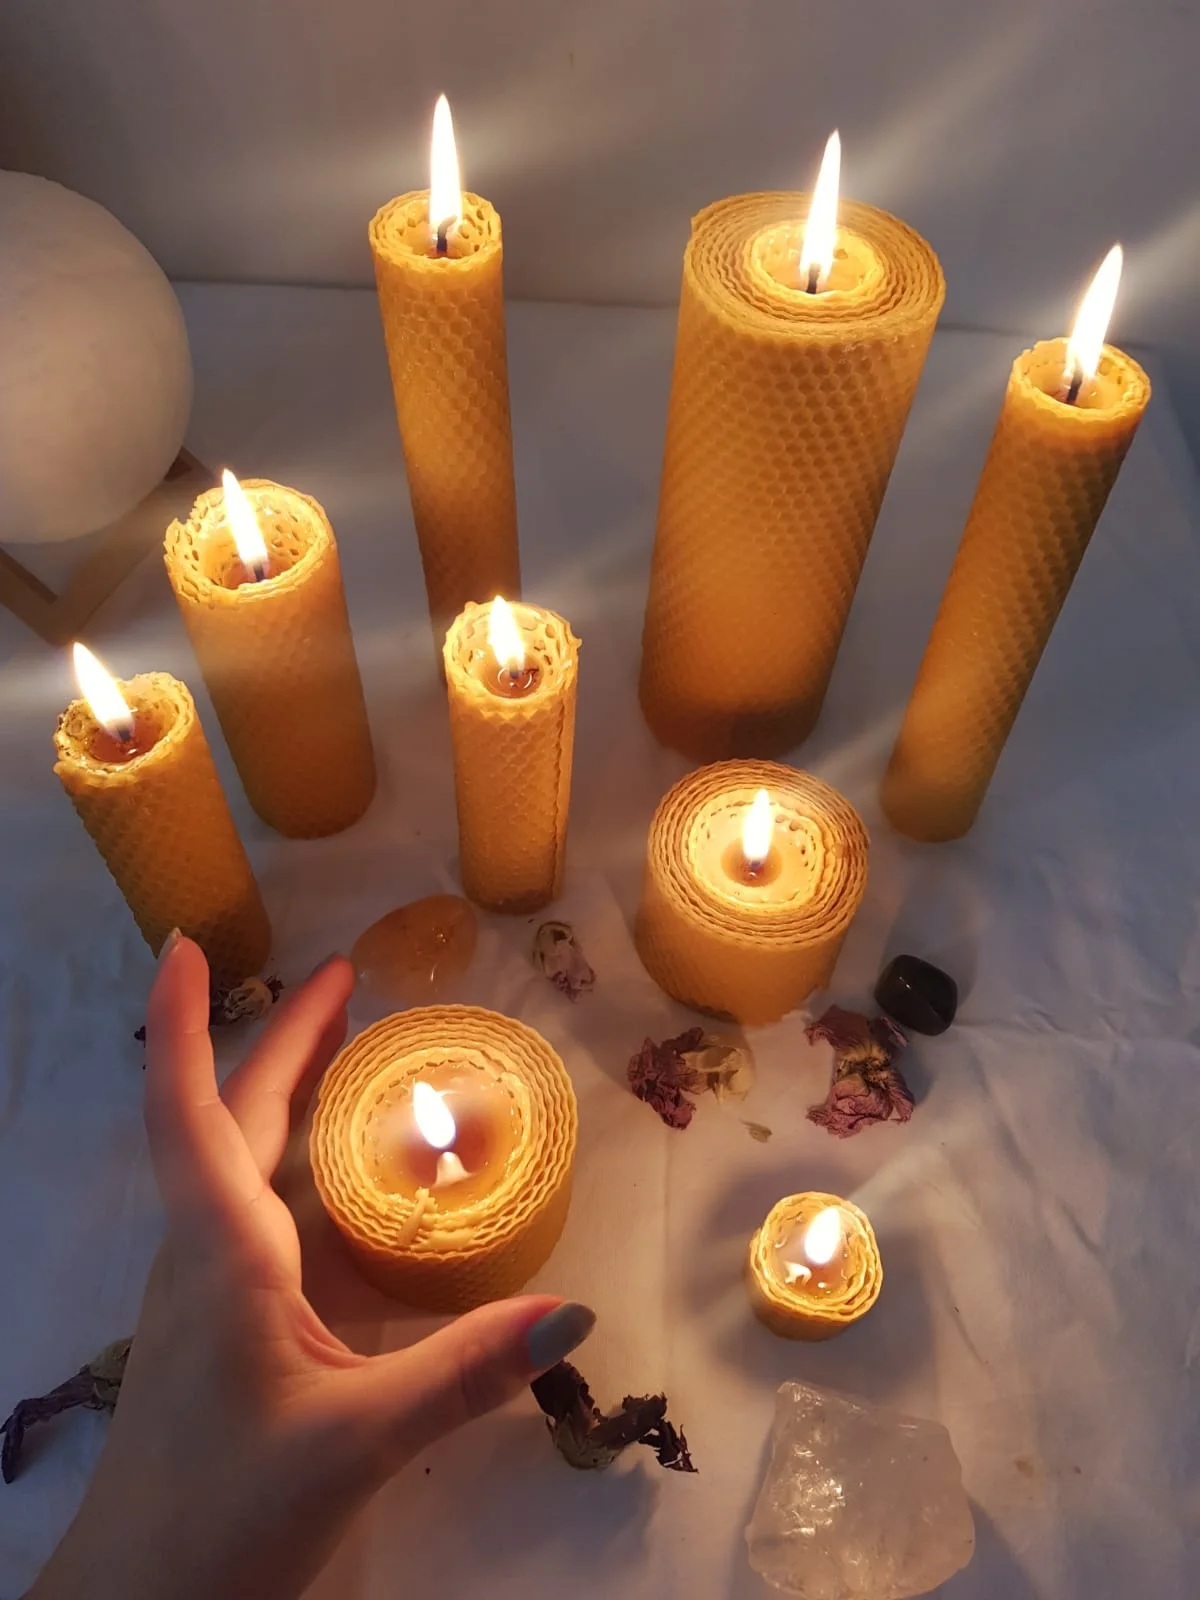 

Beeswax Candle Handmade Home Decoration 4 Season Lighting Solar Candle Soft Light Homestyle Five Different Size